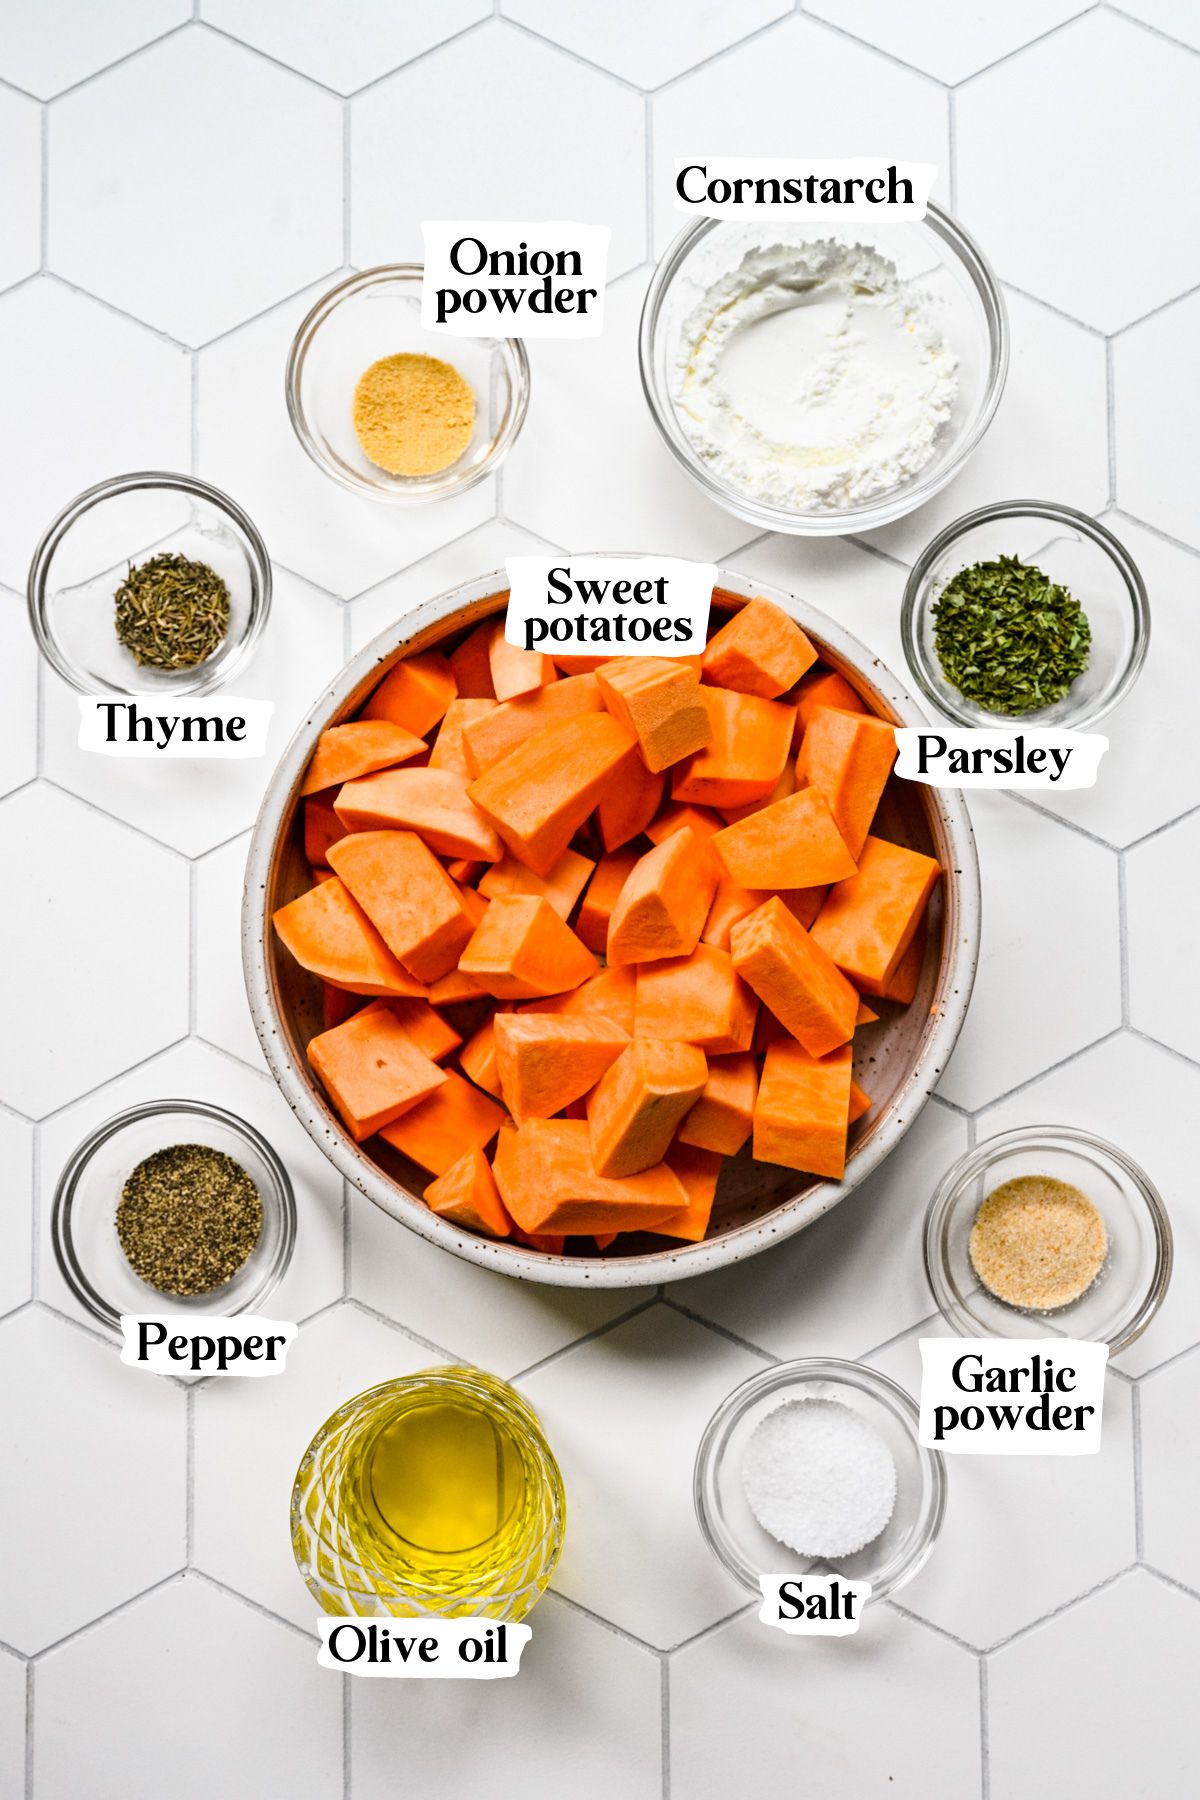 Roasted sweet potato ingredients including sweet potatoes and olive oil.